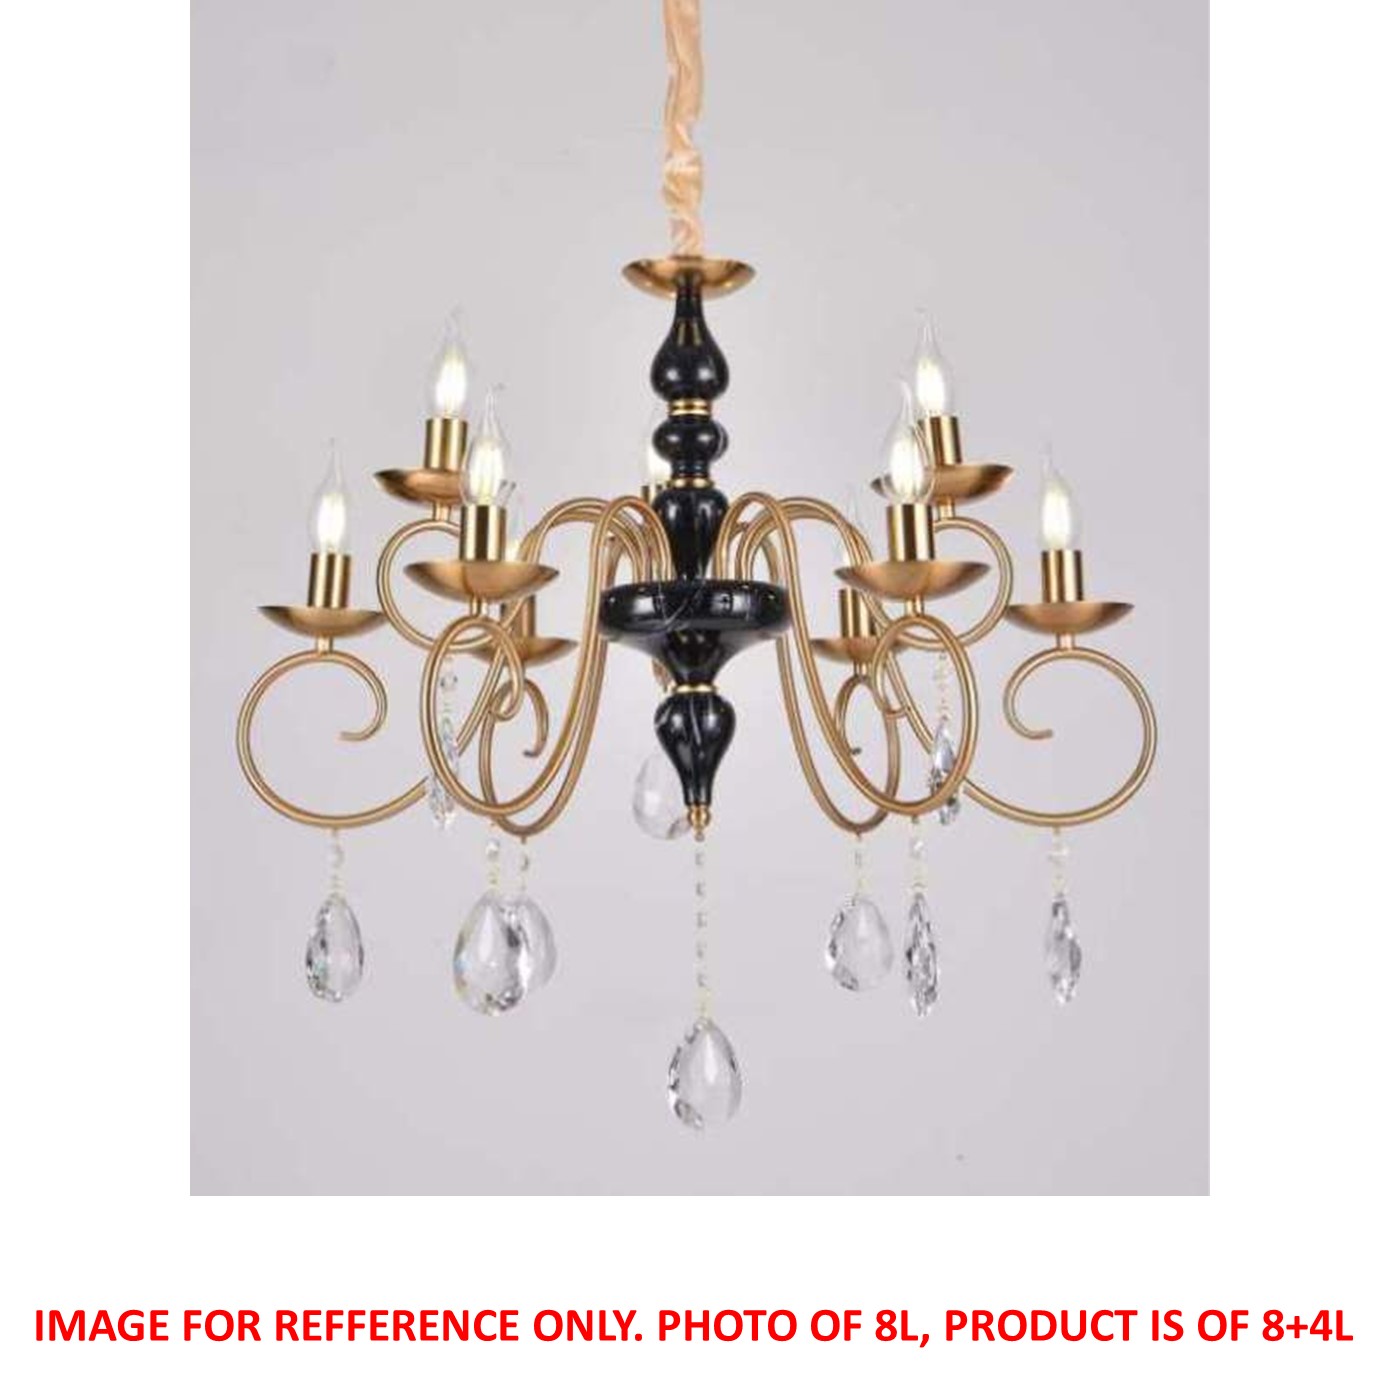 GEH-6237-8+4P Candle Arm Chandelier